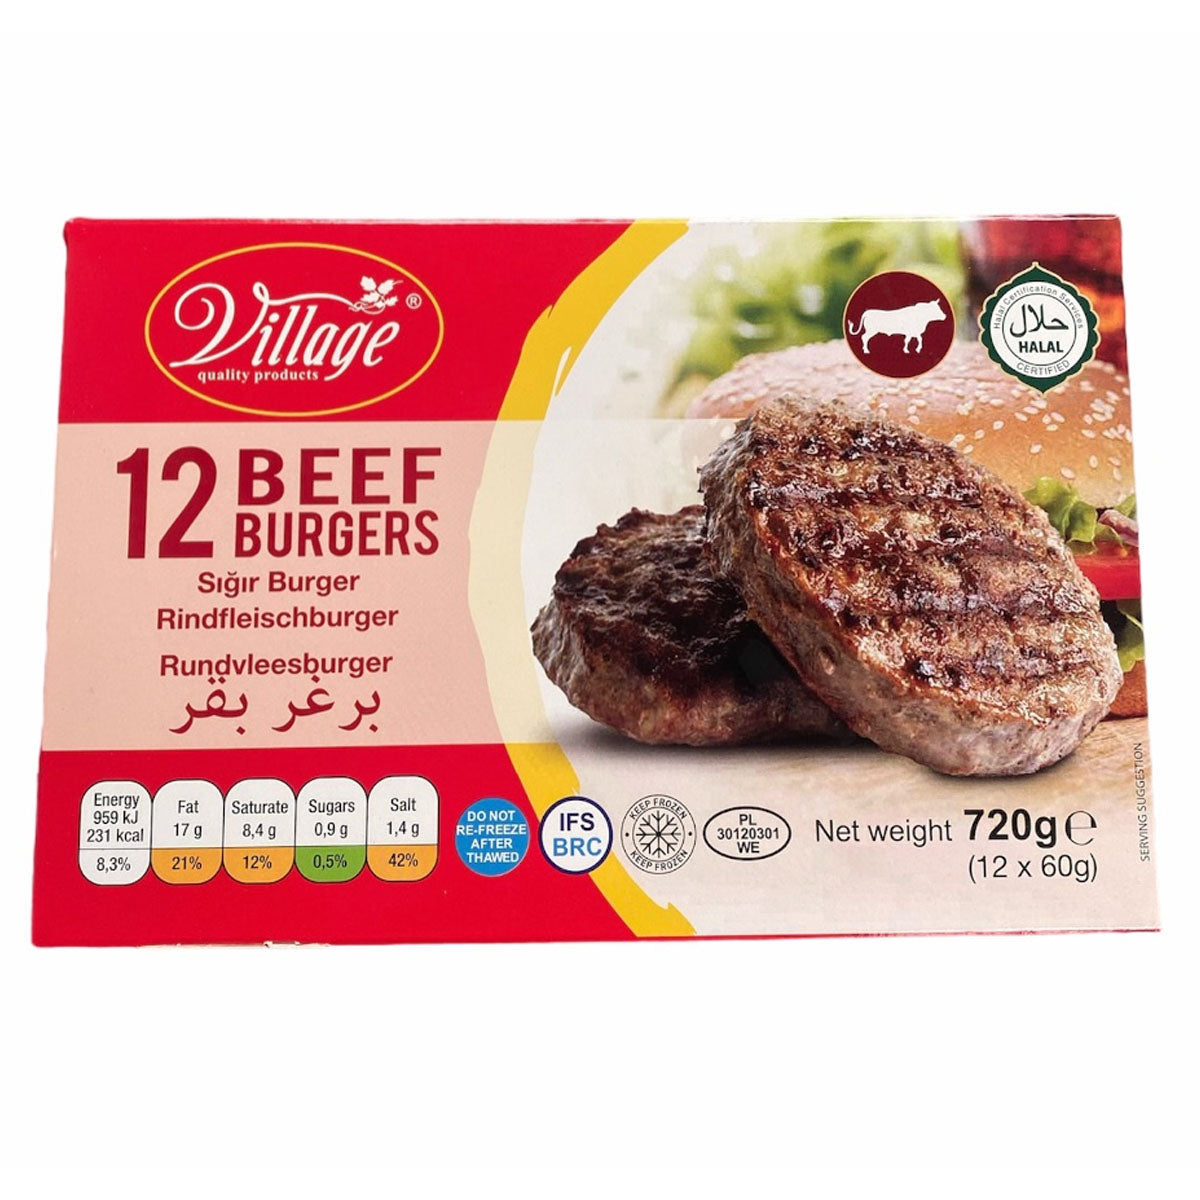 Village - 12 Beef Burgers - 720g - Continental Food Store